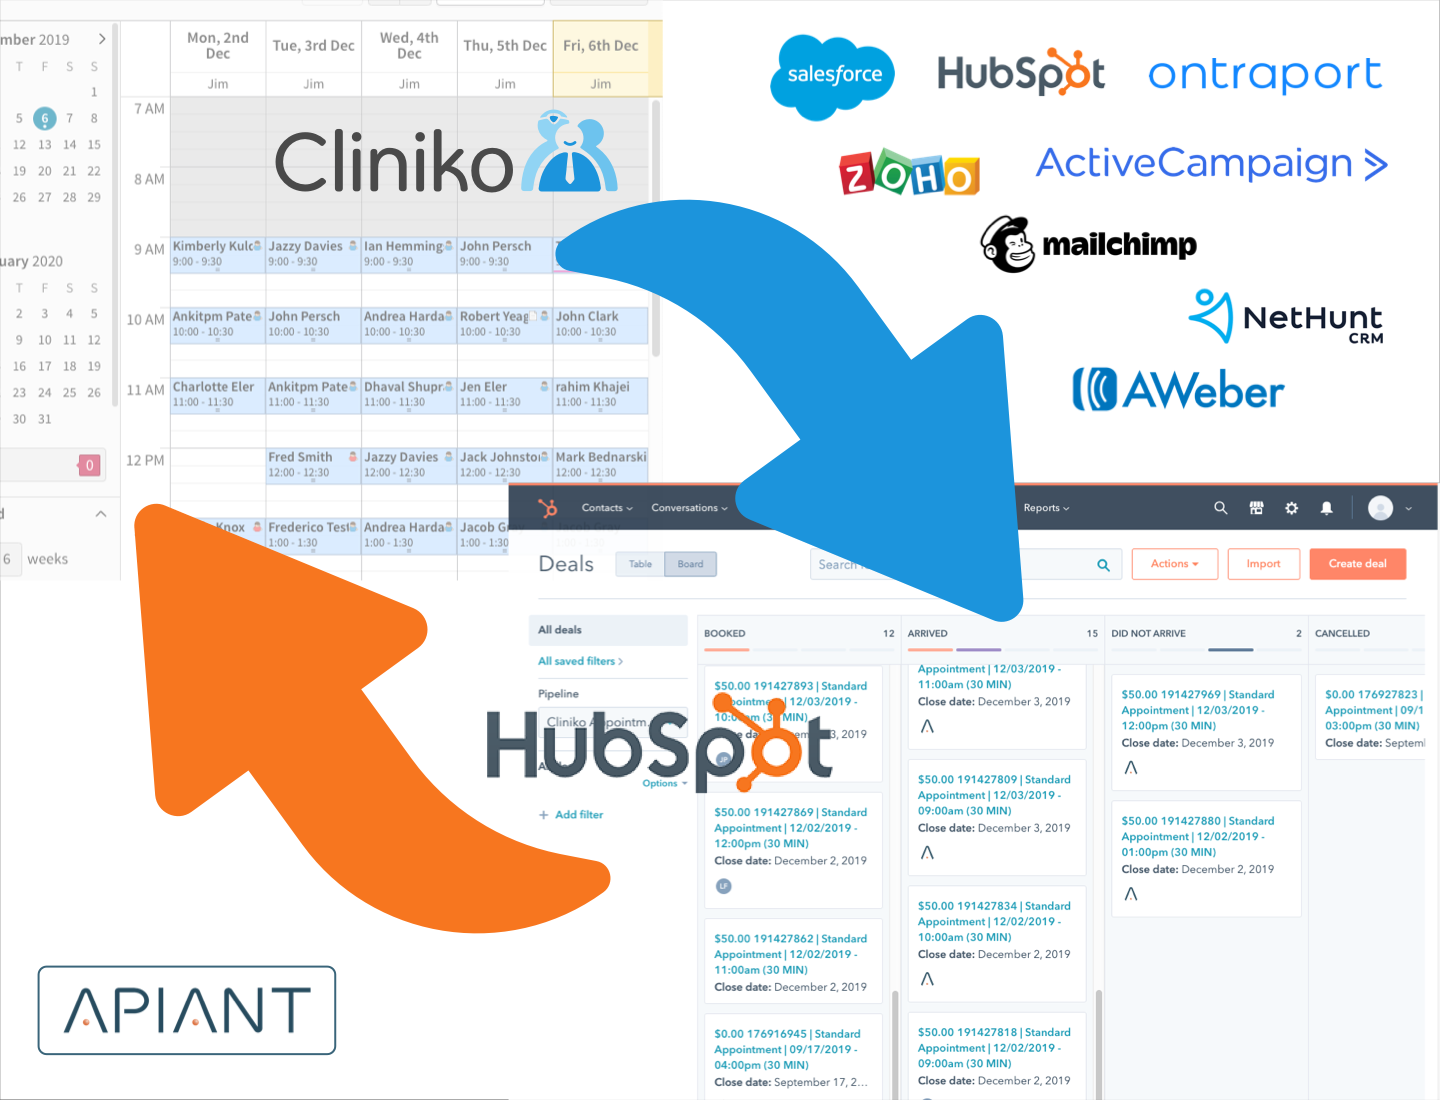 Syncing between hubspot and Cliniko using Apiant